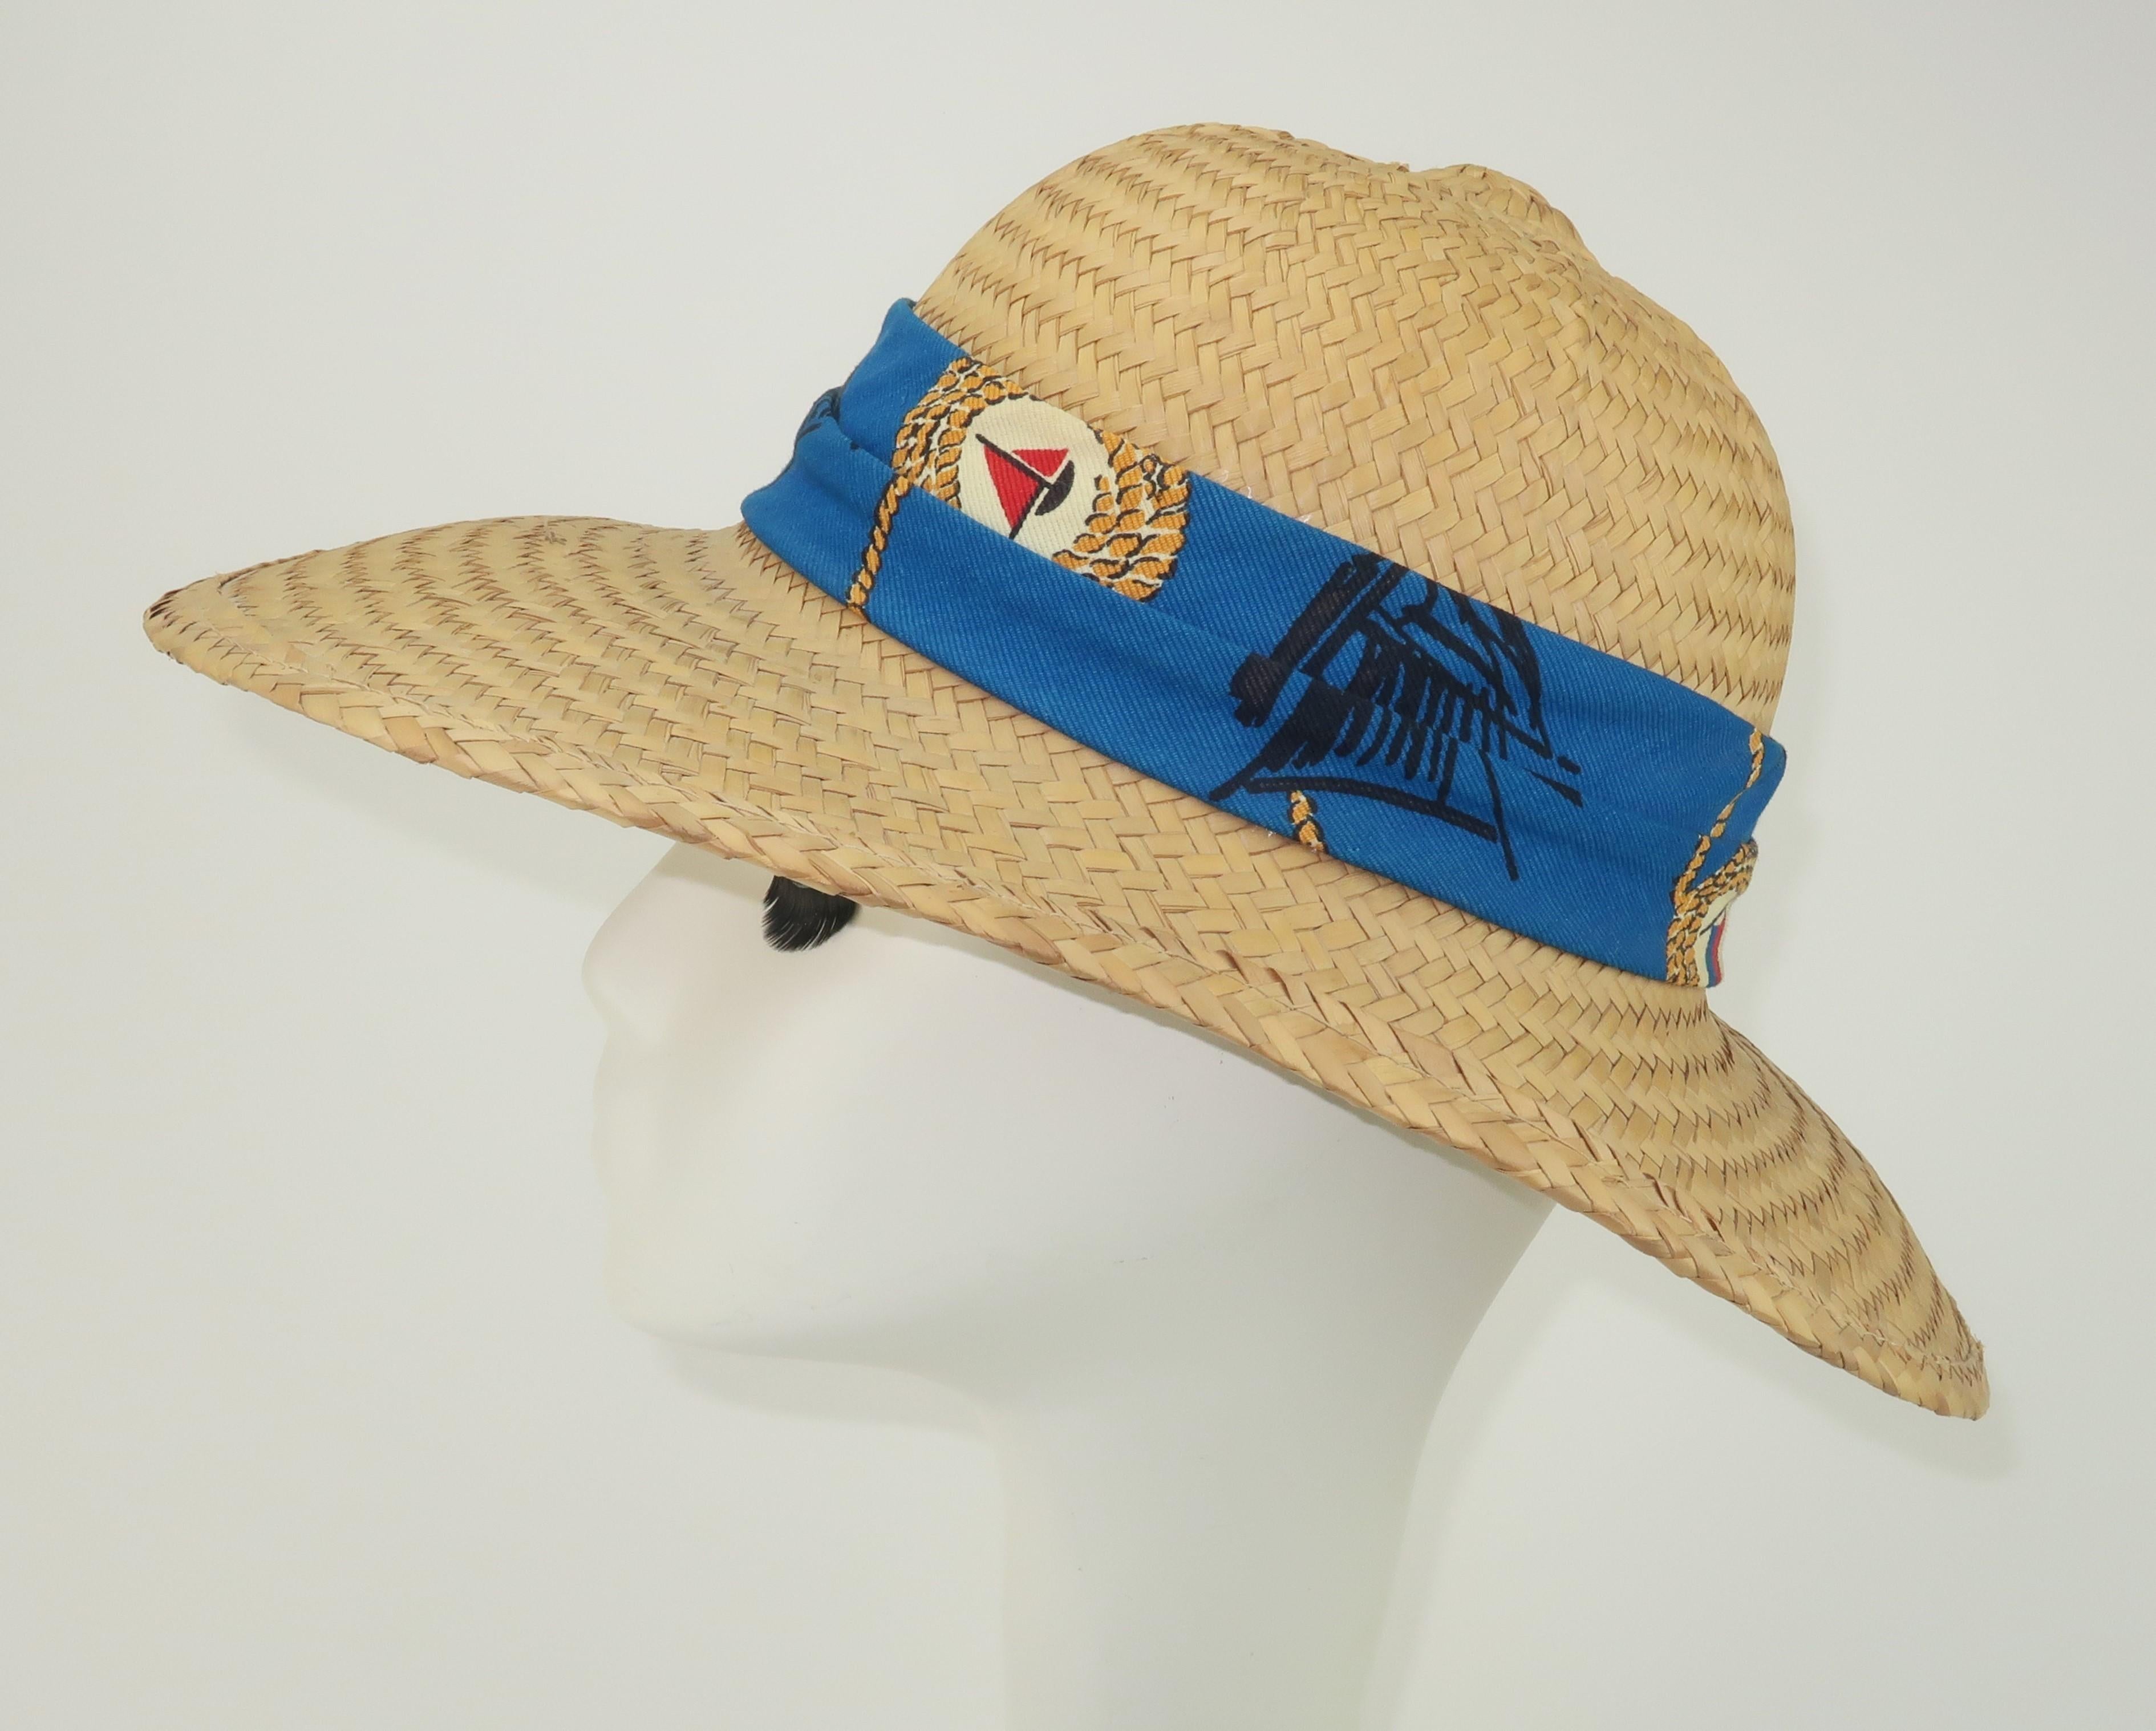 1960's Billie Ross of the Palm Beaches natural straw hat with a nautical band in shades of red, white, blue and golden yellow.  The body of the hat was made in Mexico and it has a unique elongated silhouette with pith helmet style details including